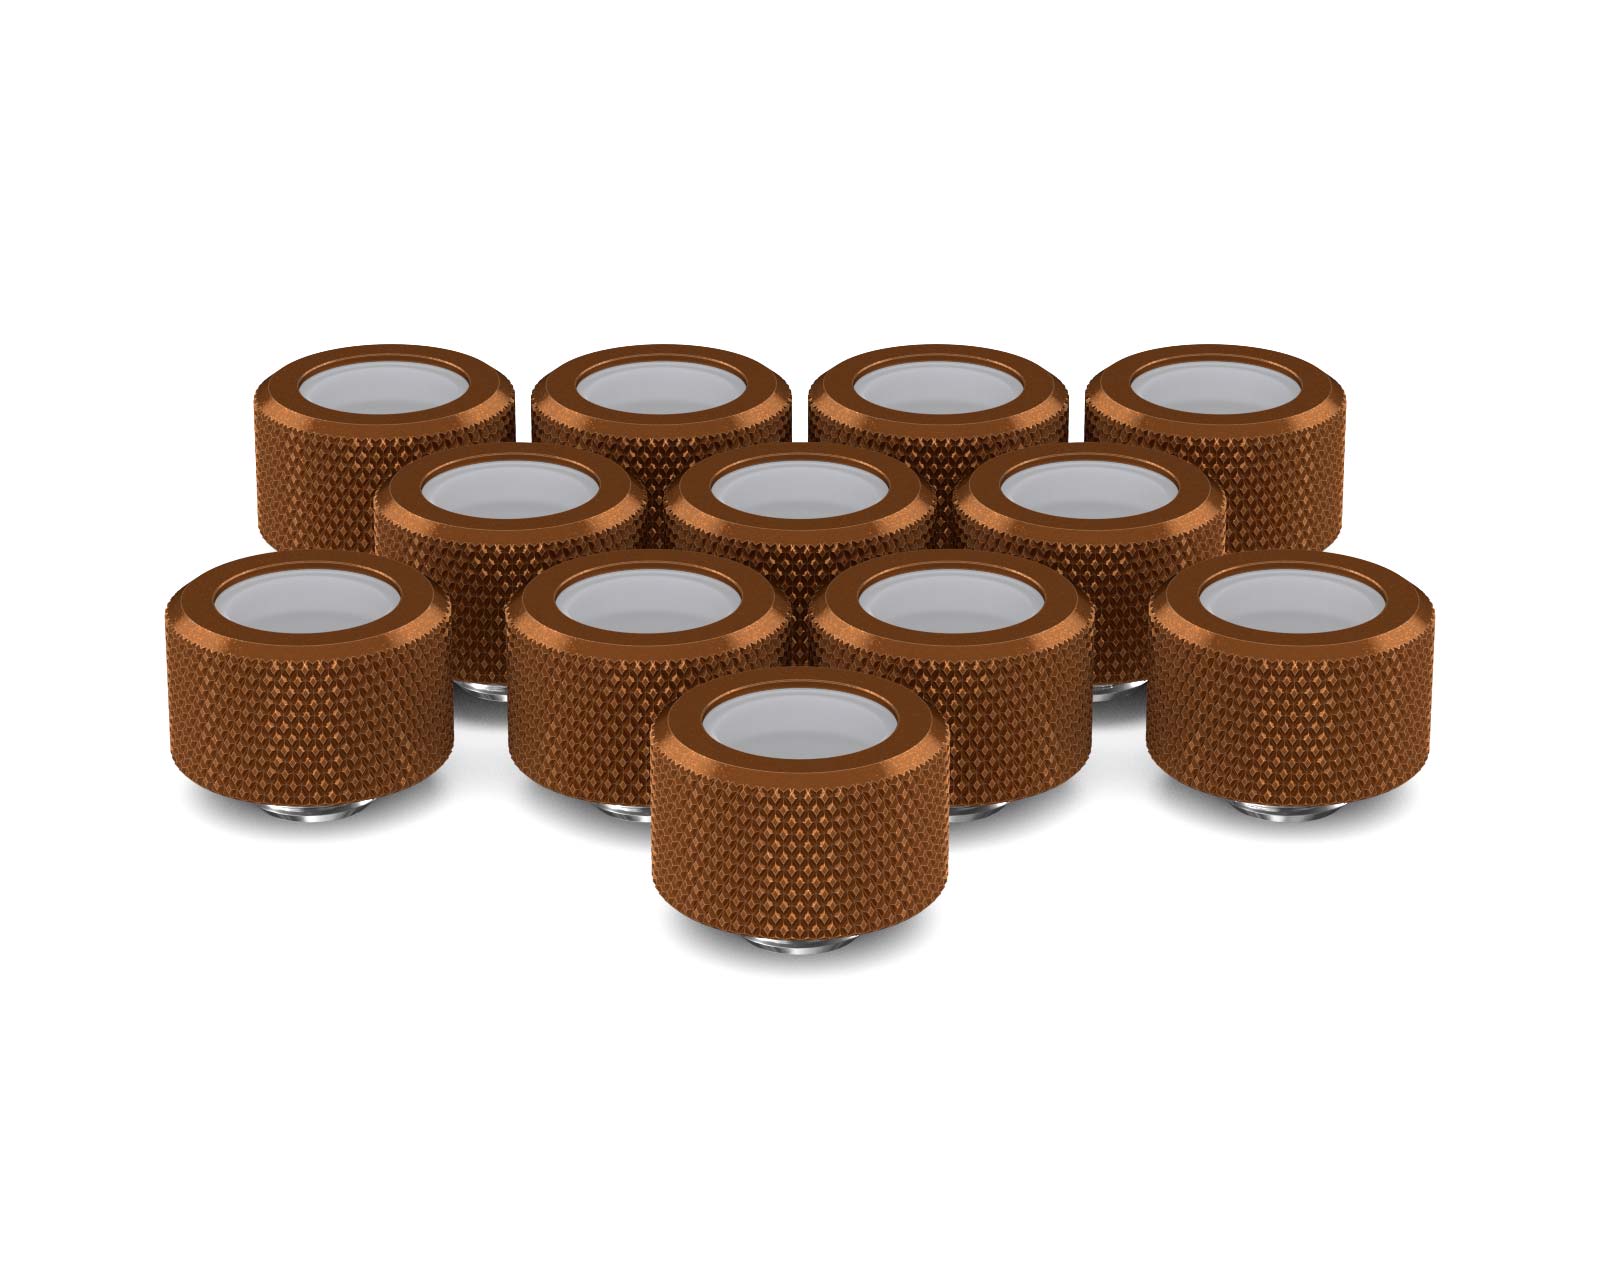 PrimoChill 16mm OD Rigid SX Fitting - 12 Pack - PrimoChill - KEEPING IT COOL Copper